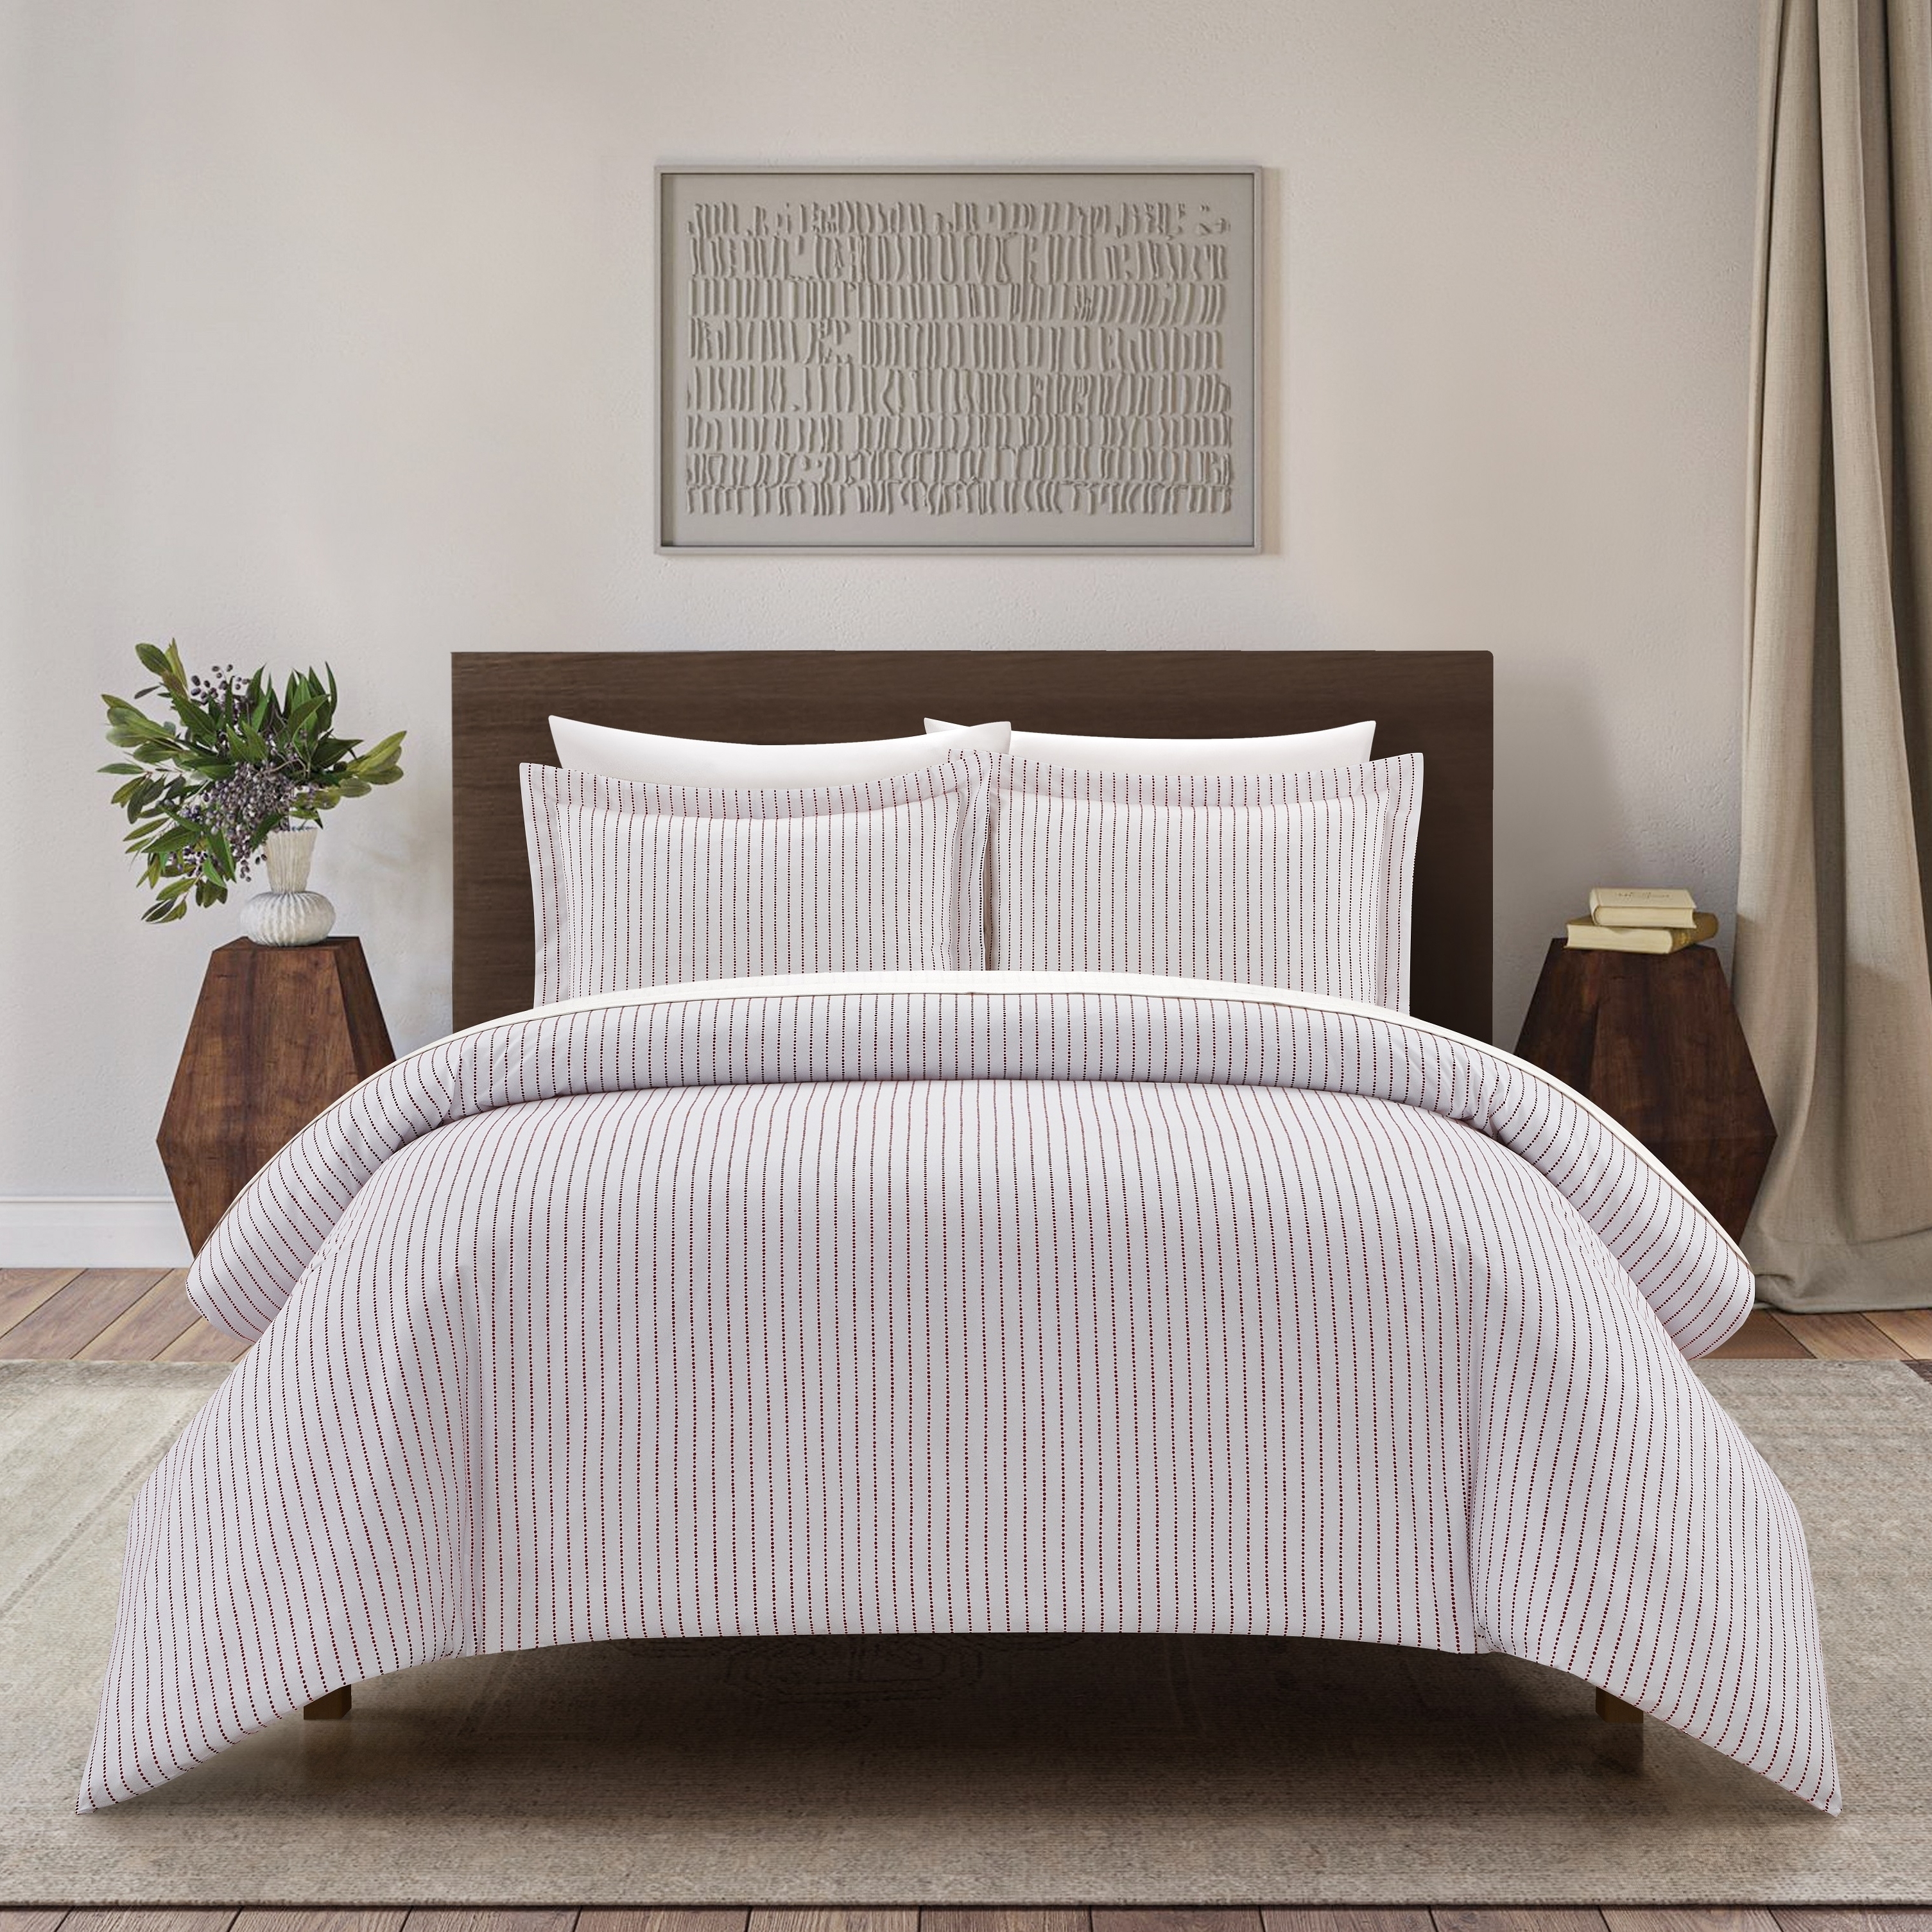 Vasey 2 Or 3 Piece Duvet Cover Set Contemporary Solid White With Dot Striped - Wine Red, Twin